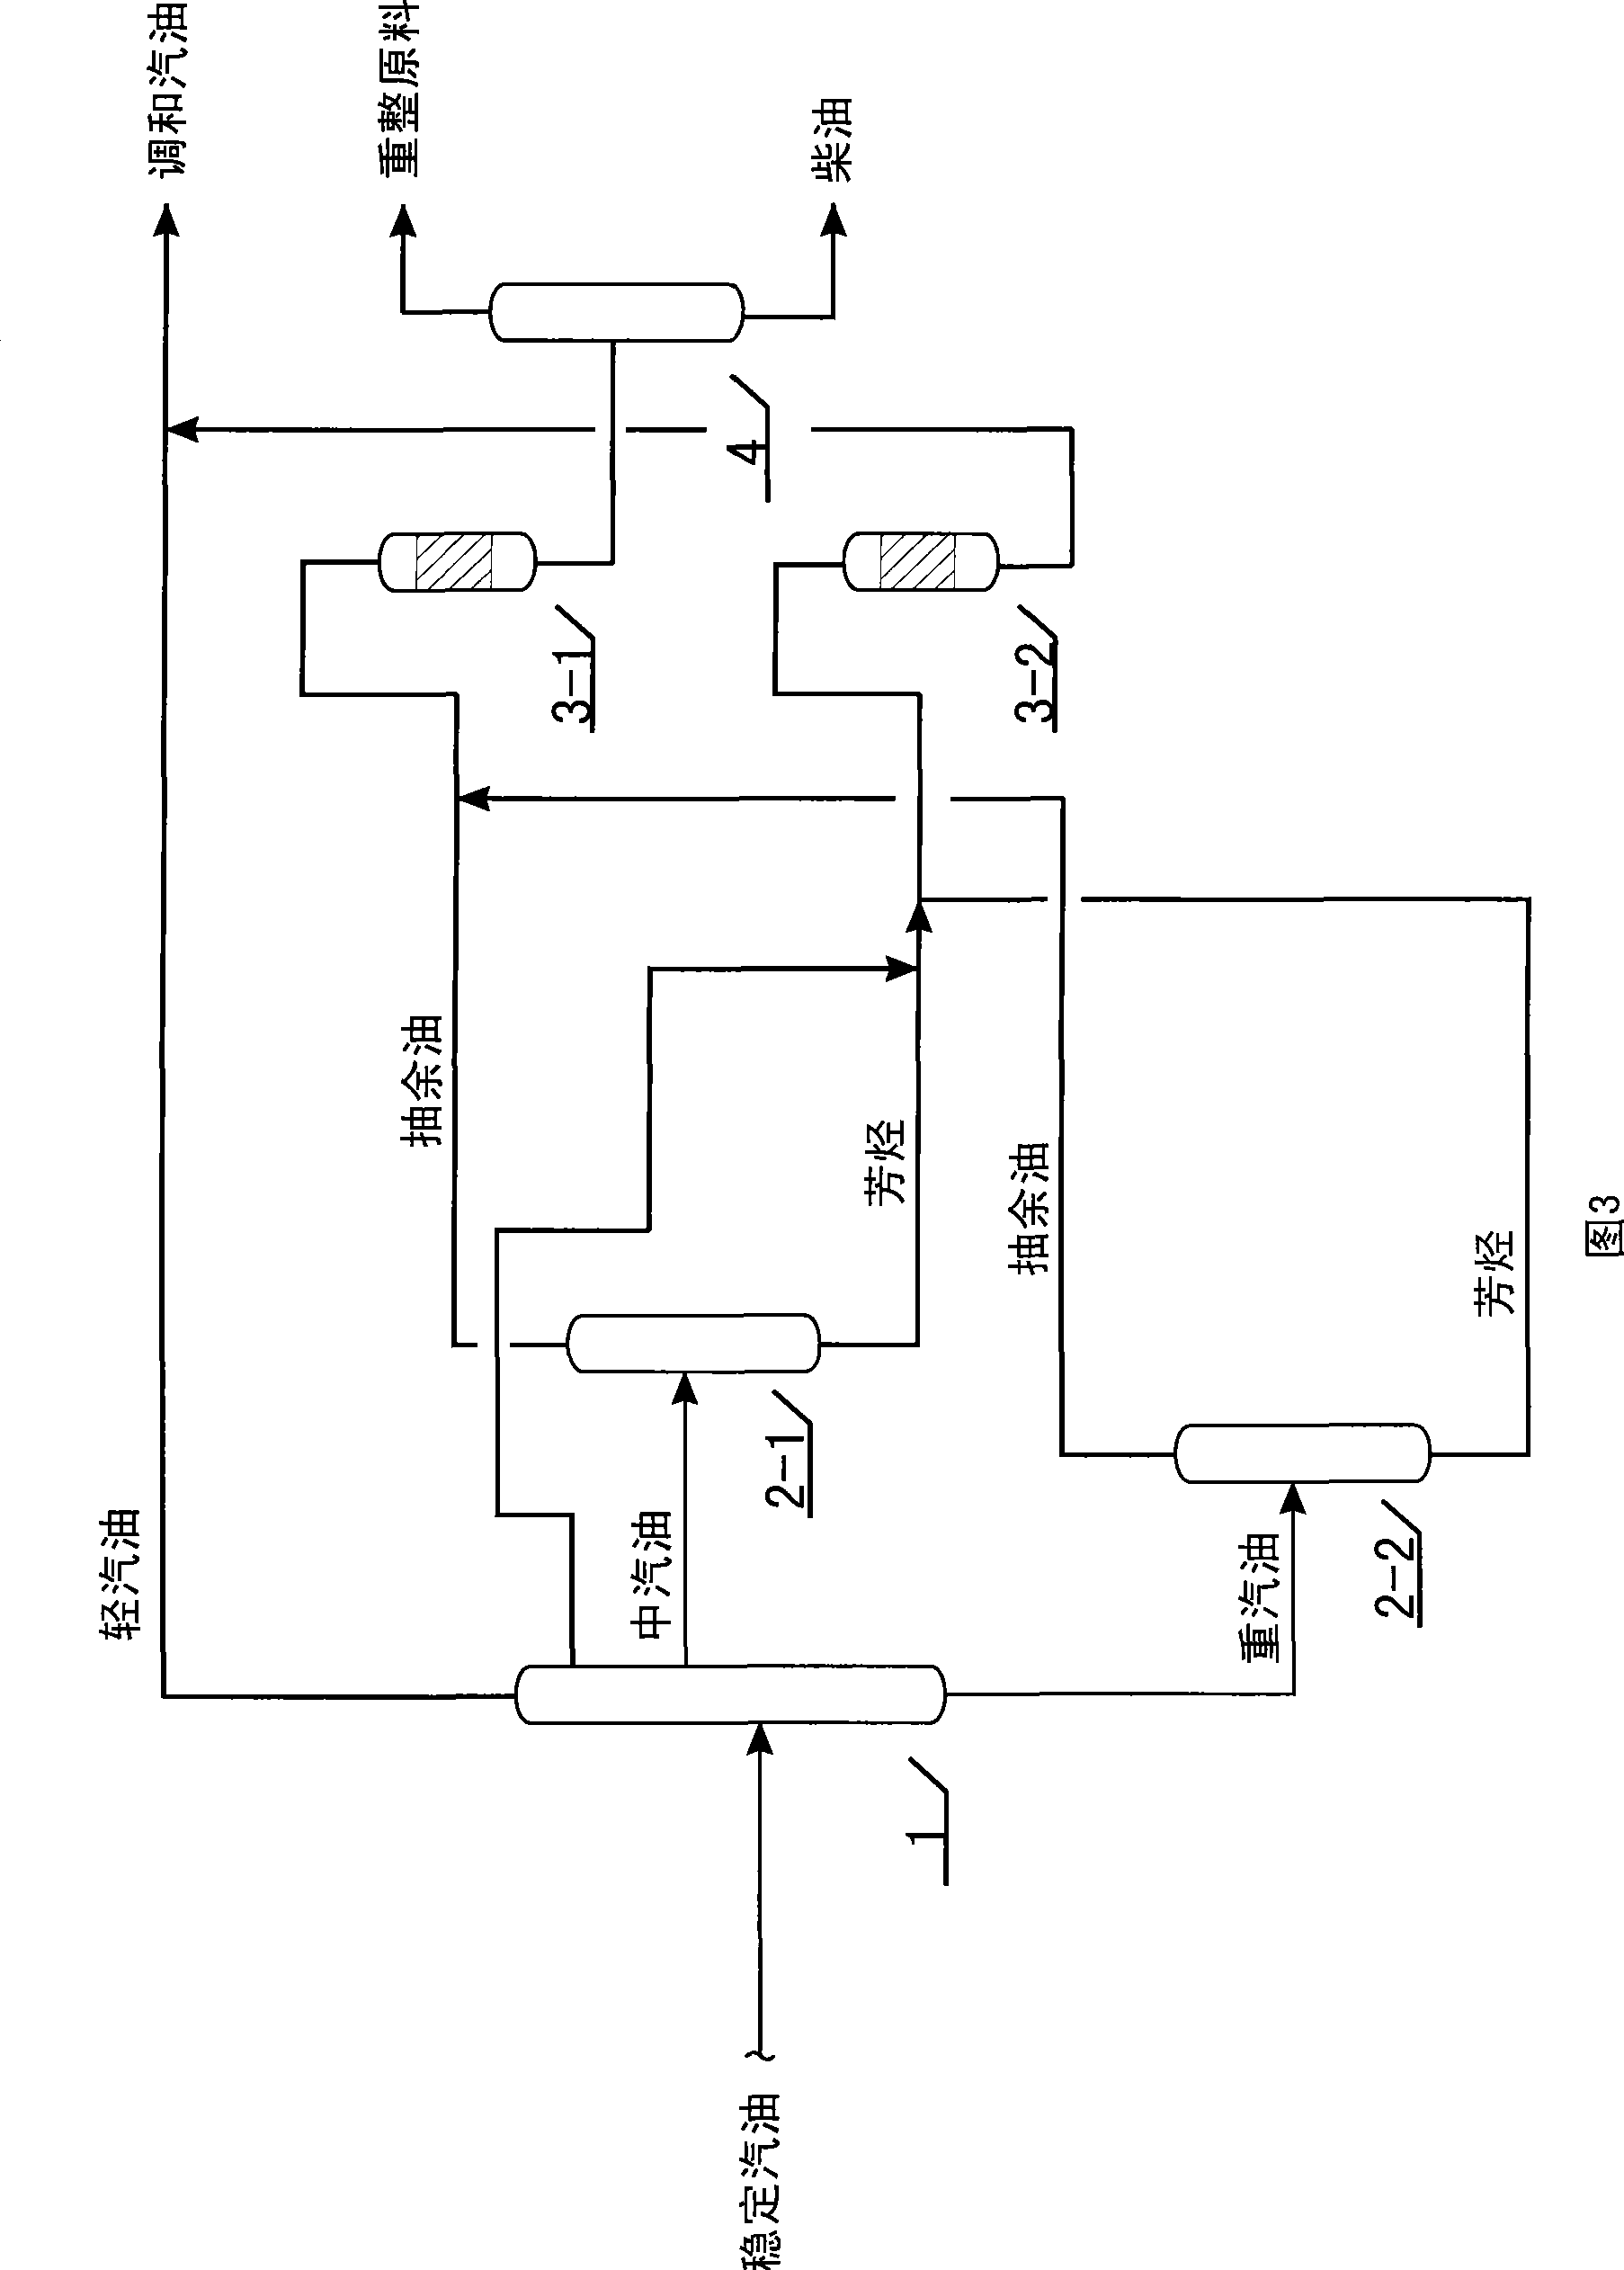 System and method for catalyzing hydrocarbon for recombinant production of high-quality gasoline